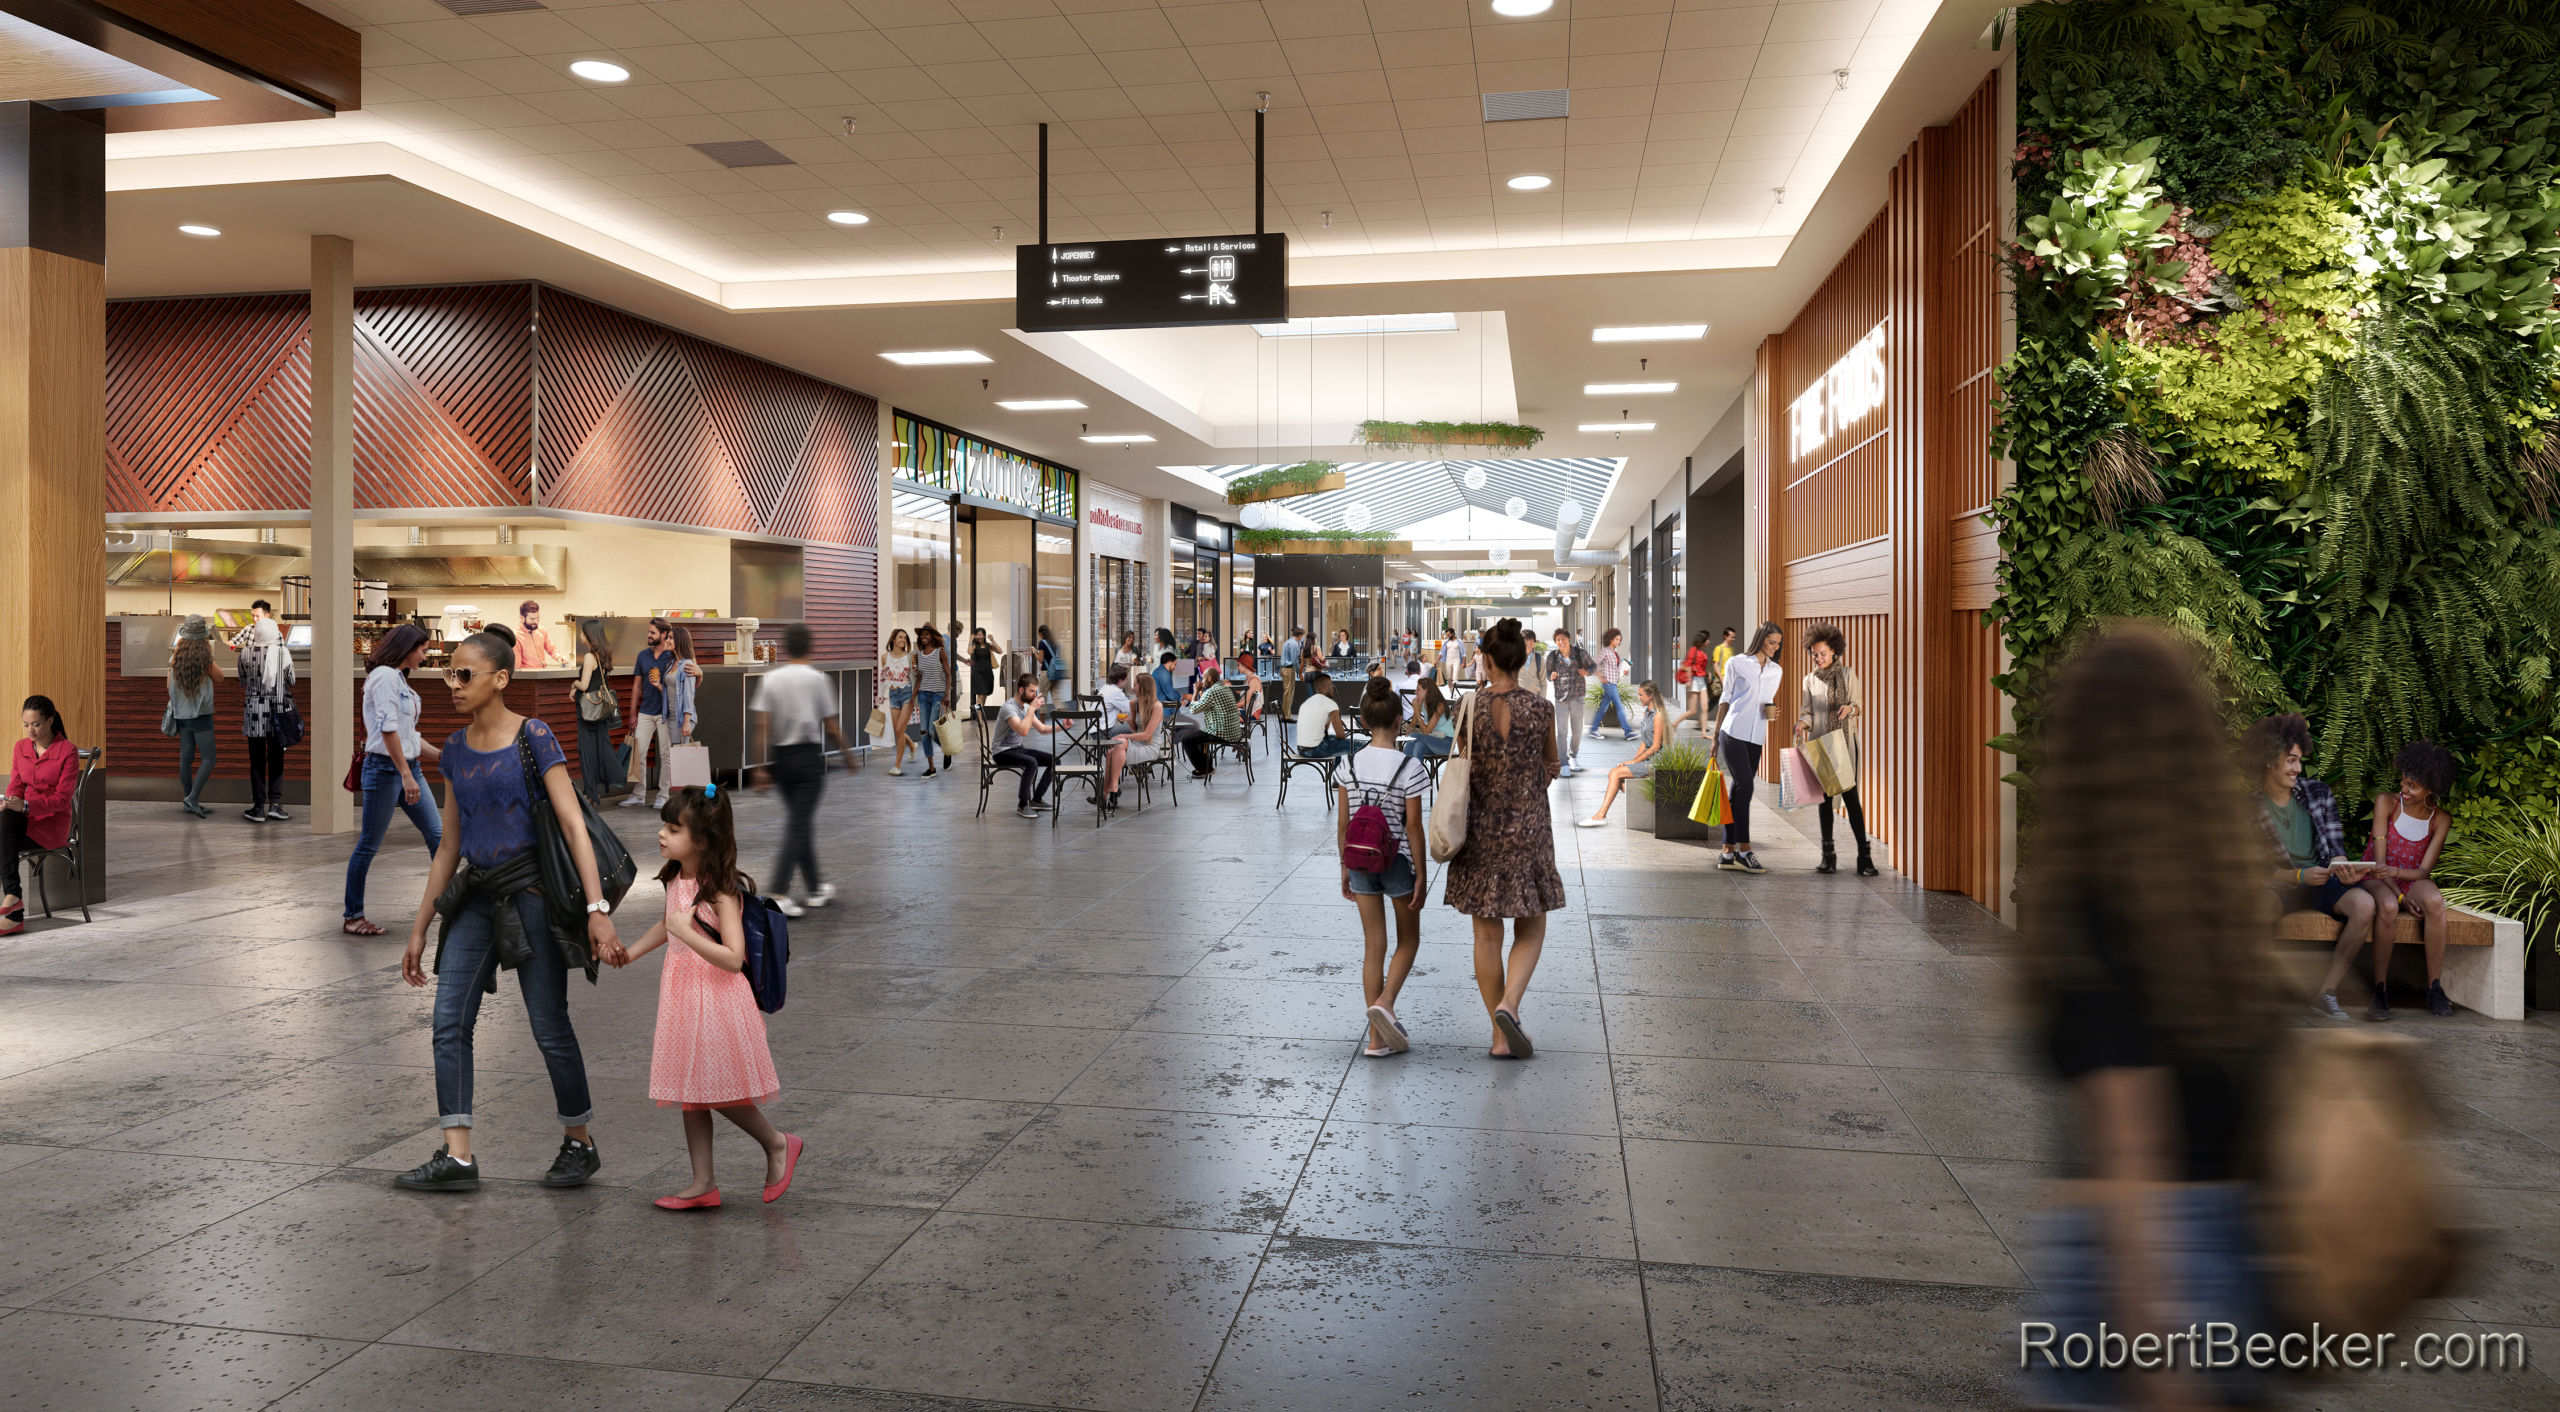 retail architectural renderings